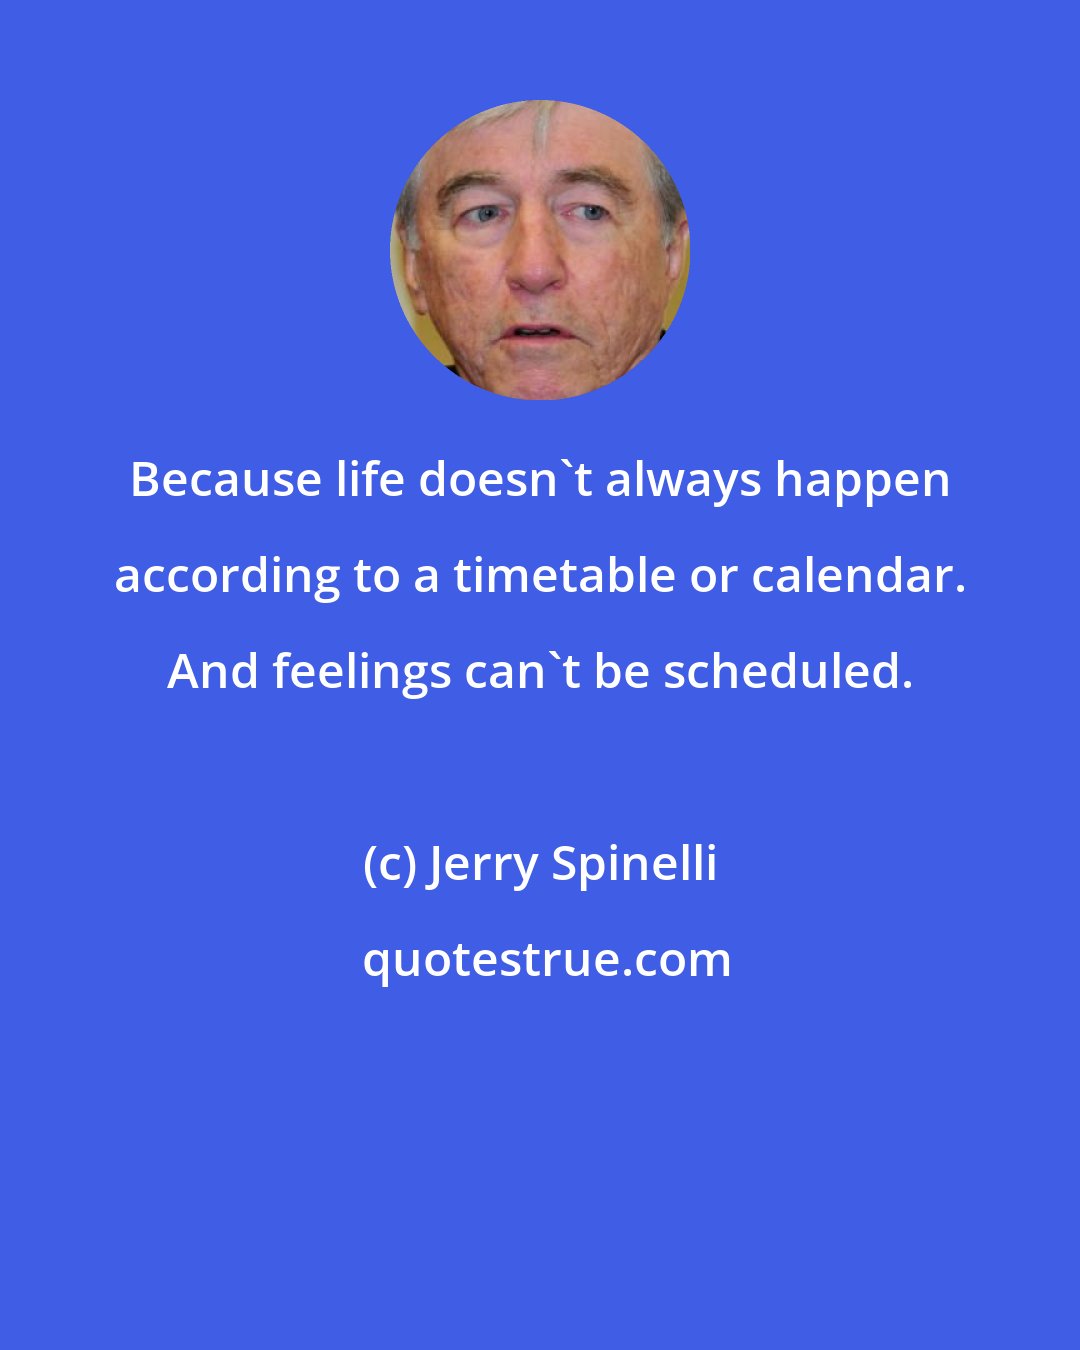 Jerry Spinelli: Because life doesn't always happen according to a timetable or calendar. And feelings can't be scheduled.